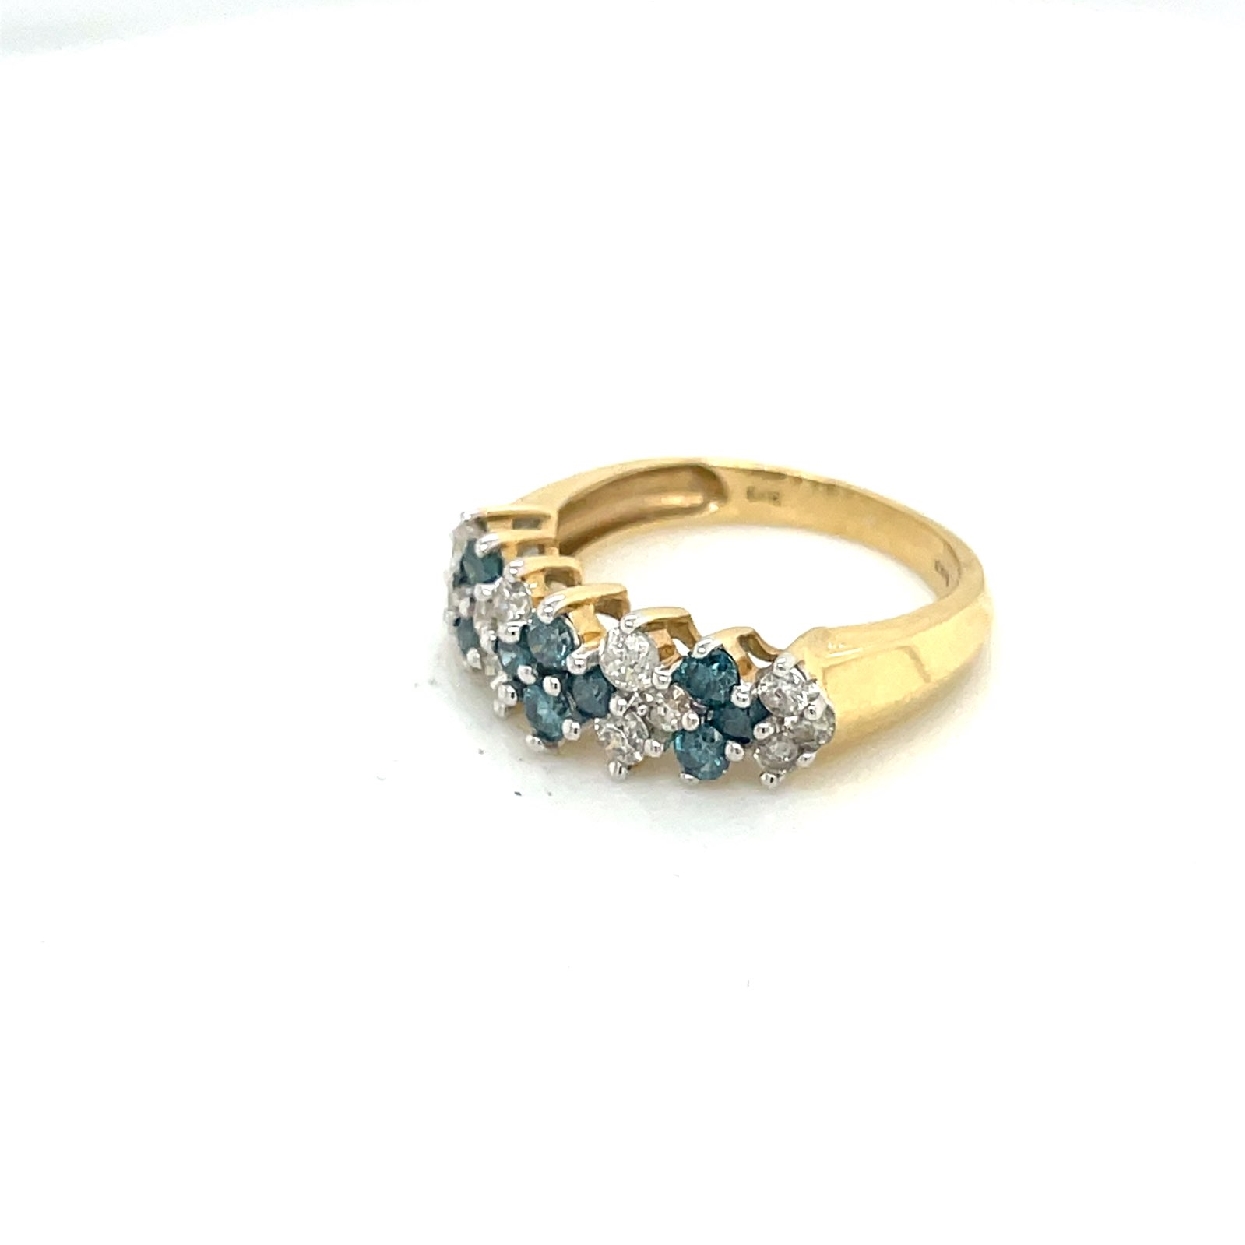 Irradiated Blue and White Diamond 14k Yellow Gold Cluster Ring Size 6
1CTTW-- 1/2 Blue & 1/2 White